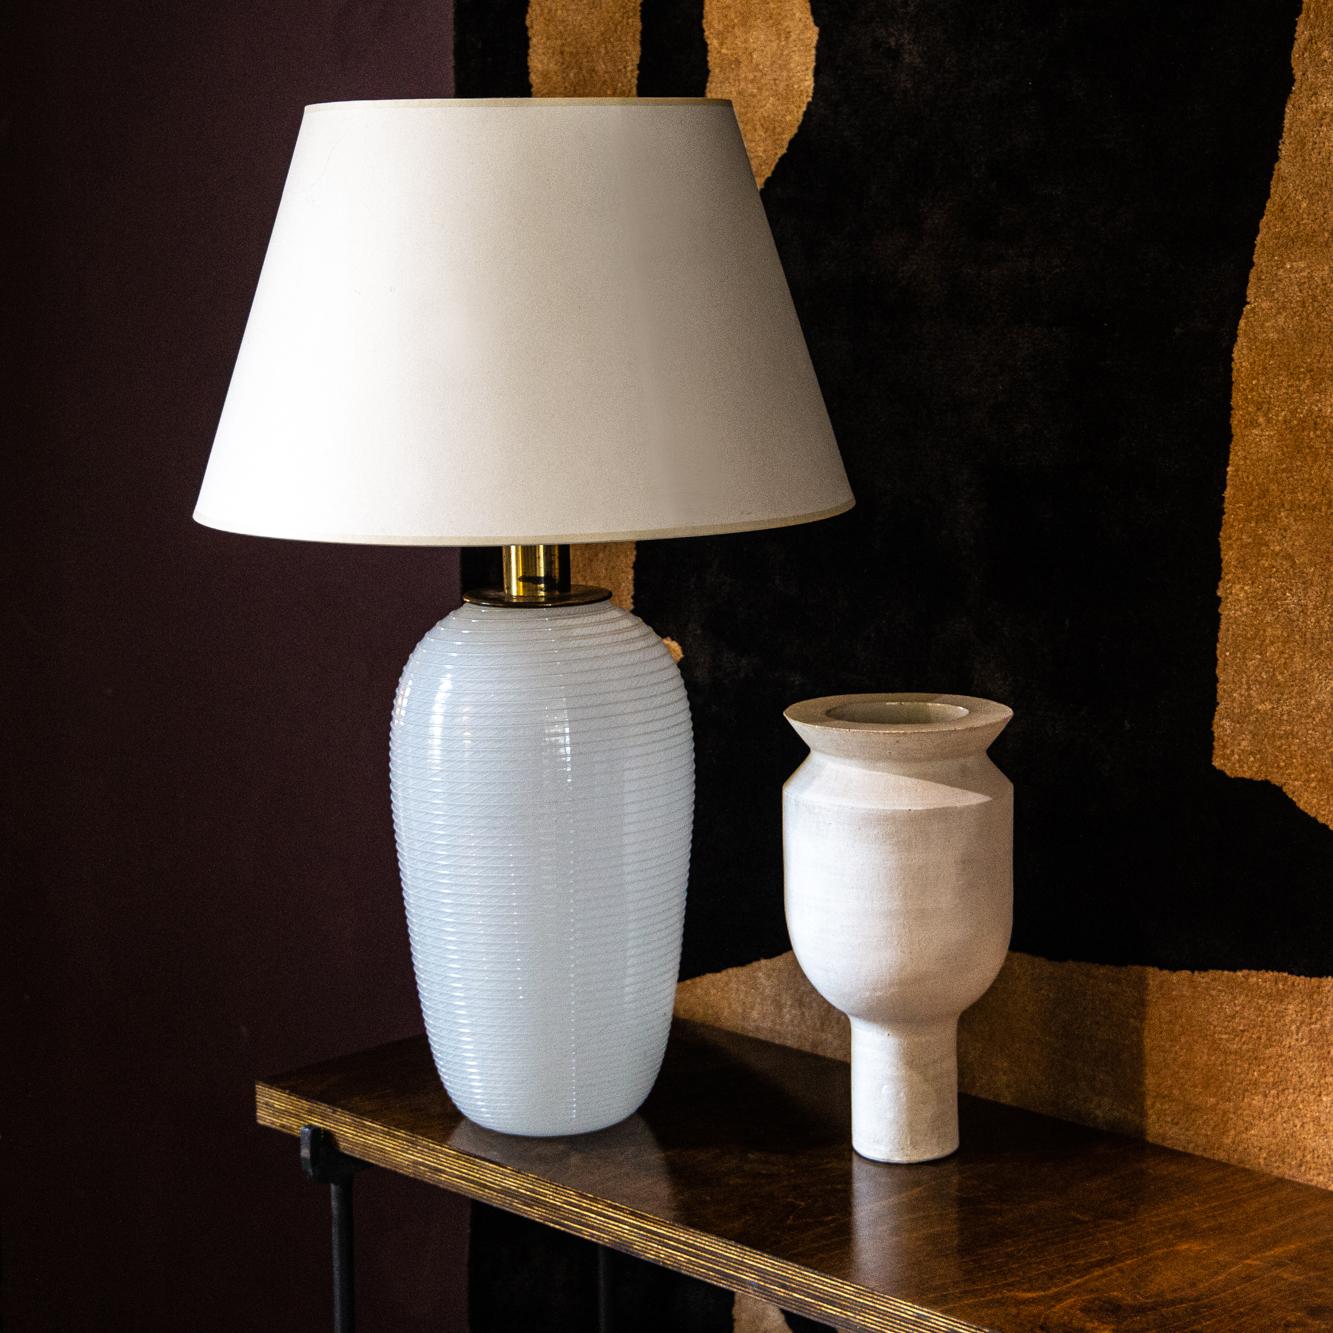 An original opaque Murano glass table lamp with ribbed detail by Venini - Venice, Italy. 
With original high quality vintage brass fittings. 
Beautiful and sumptuous quality. 
We can wire this lamp for any country/destination - please enquire. 